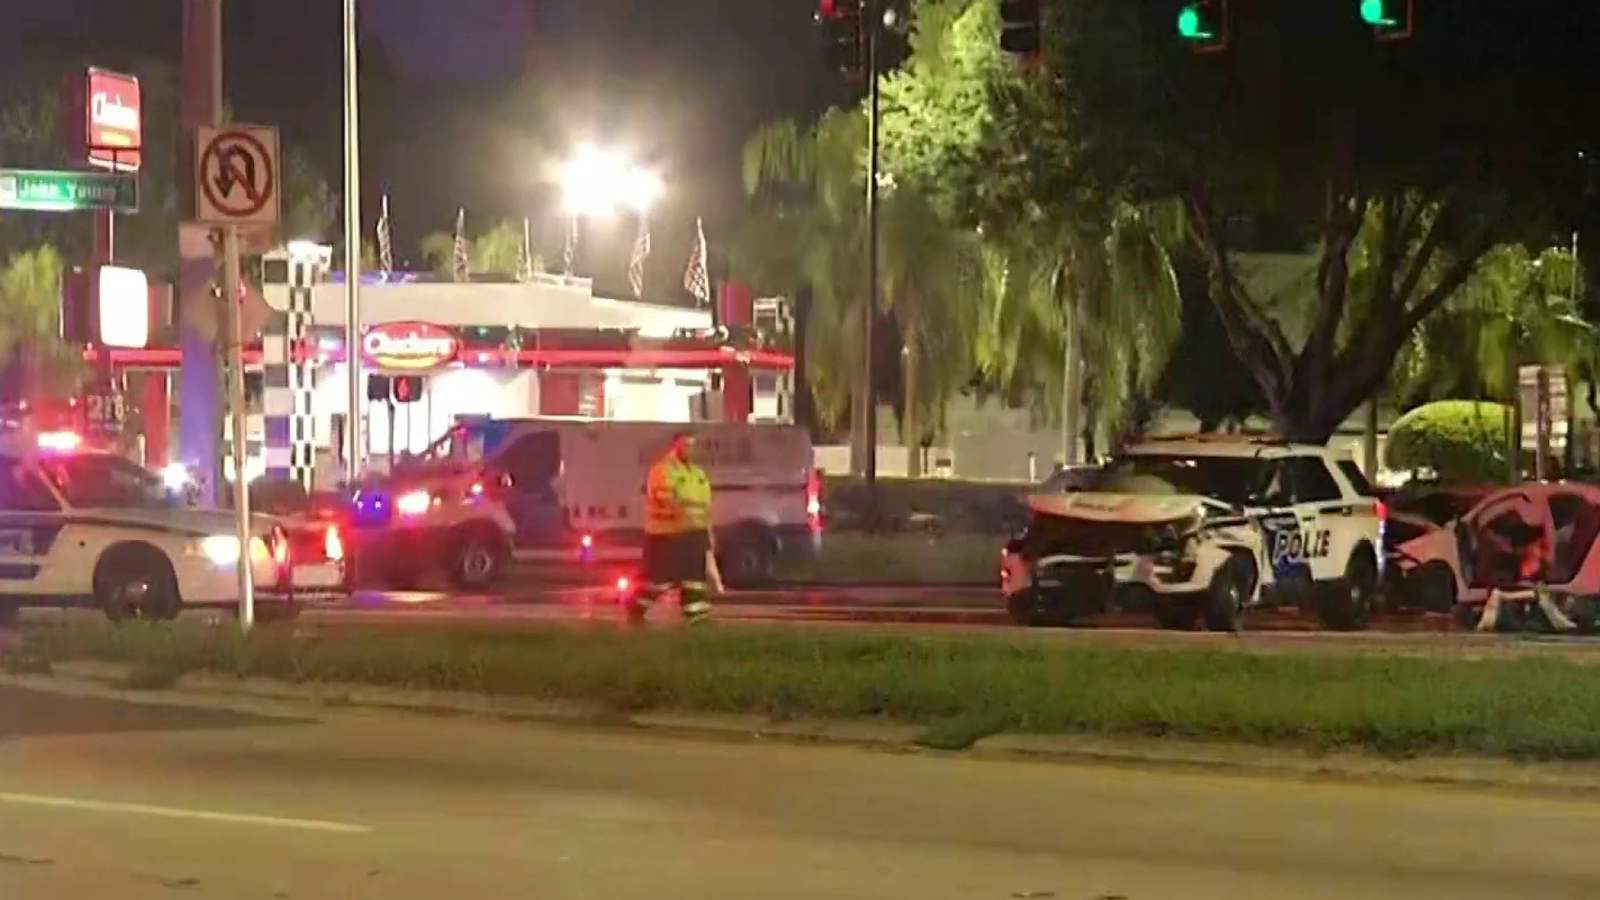 Orlando officers injured in head-on crash, police say